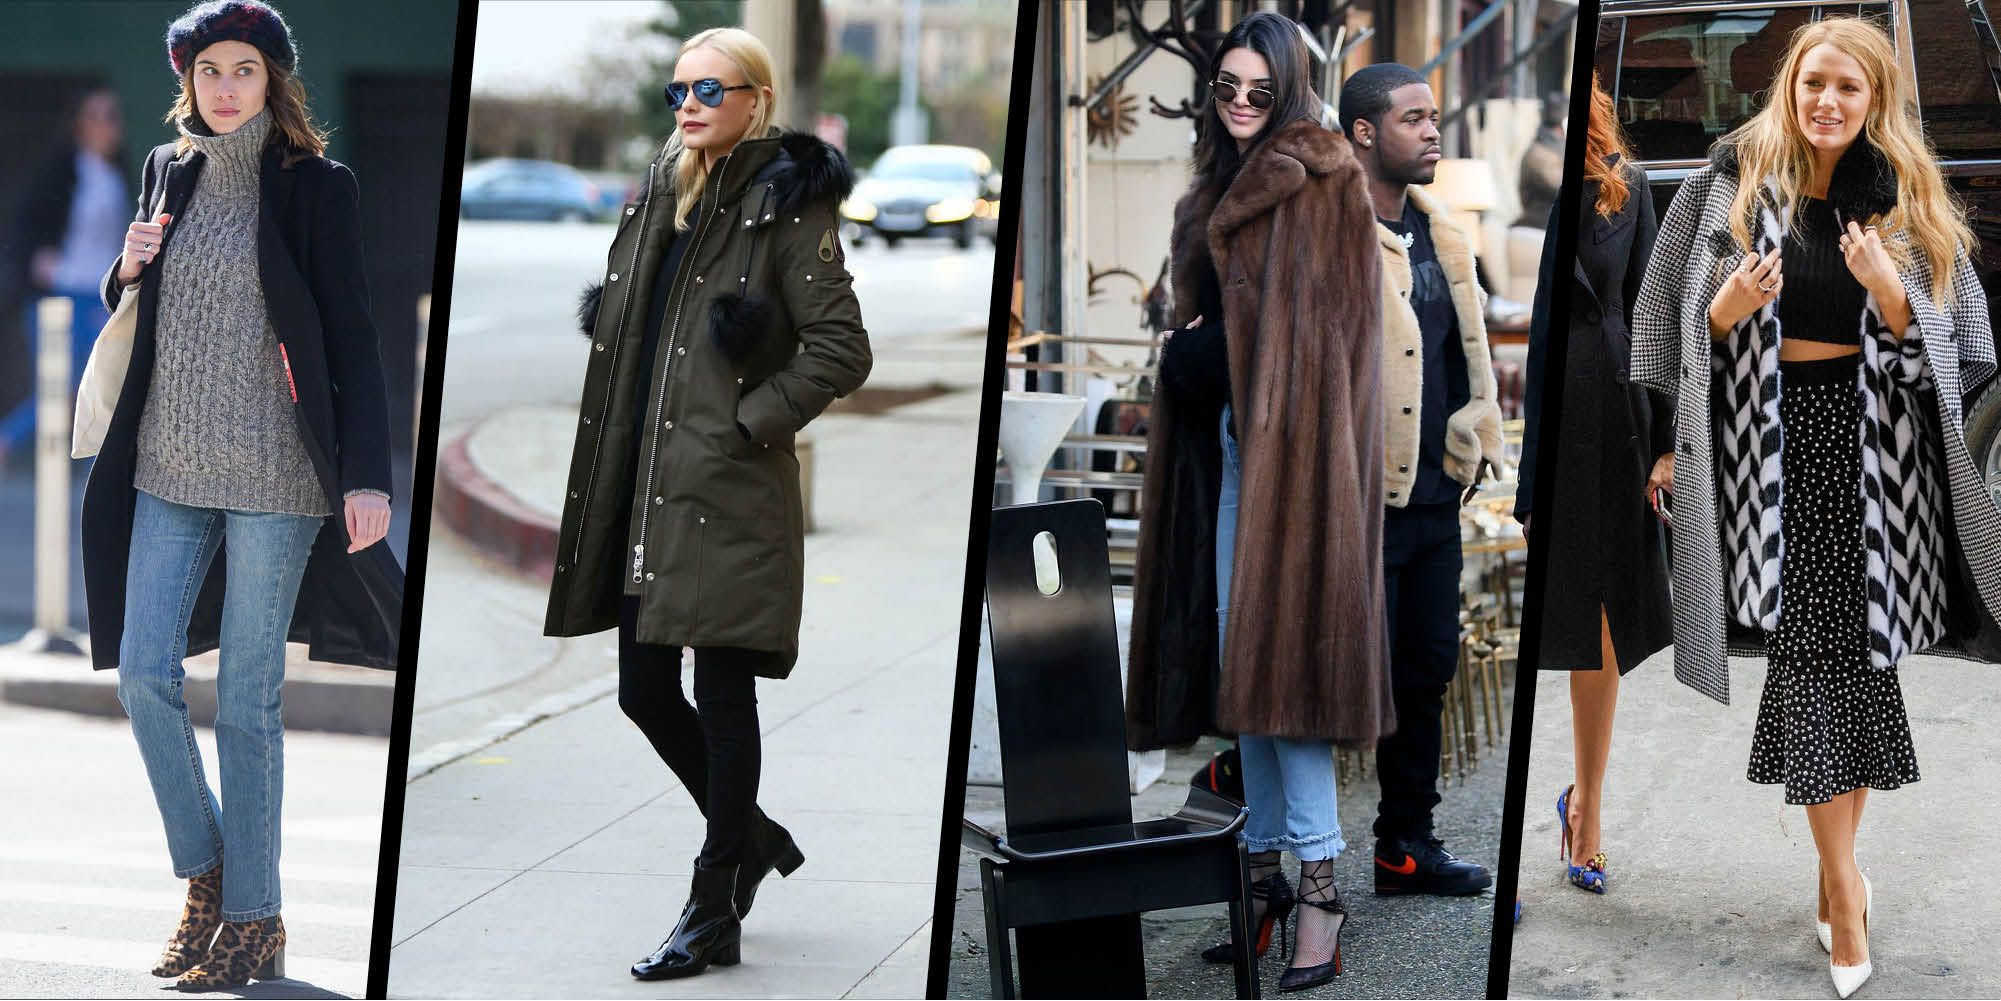 Winter style inspiration from the A-list – Celebrity style inspiration in  winter